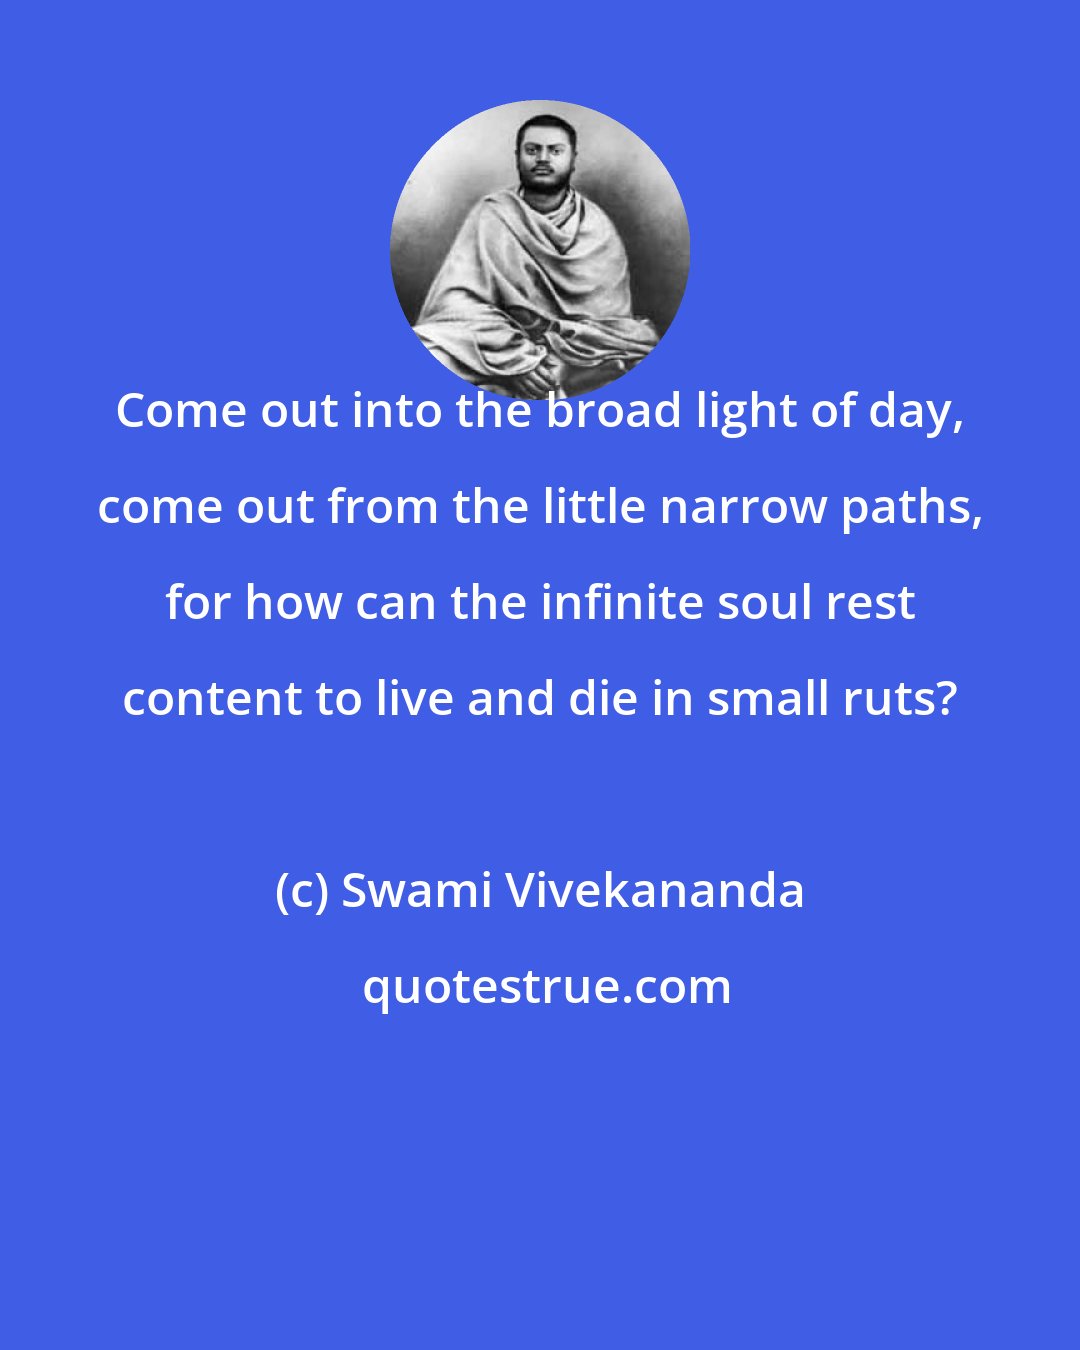 Swami Vivekananda: Come out into the broad light of day, come out from the little narrow paths, for how can the infinite soul rest content to live and die in small ruts?